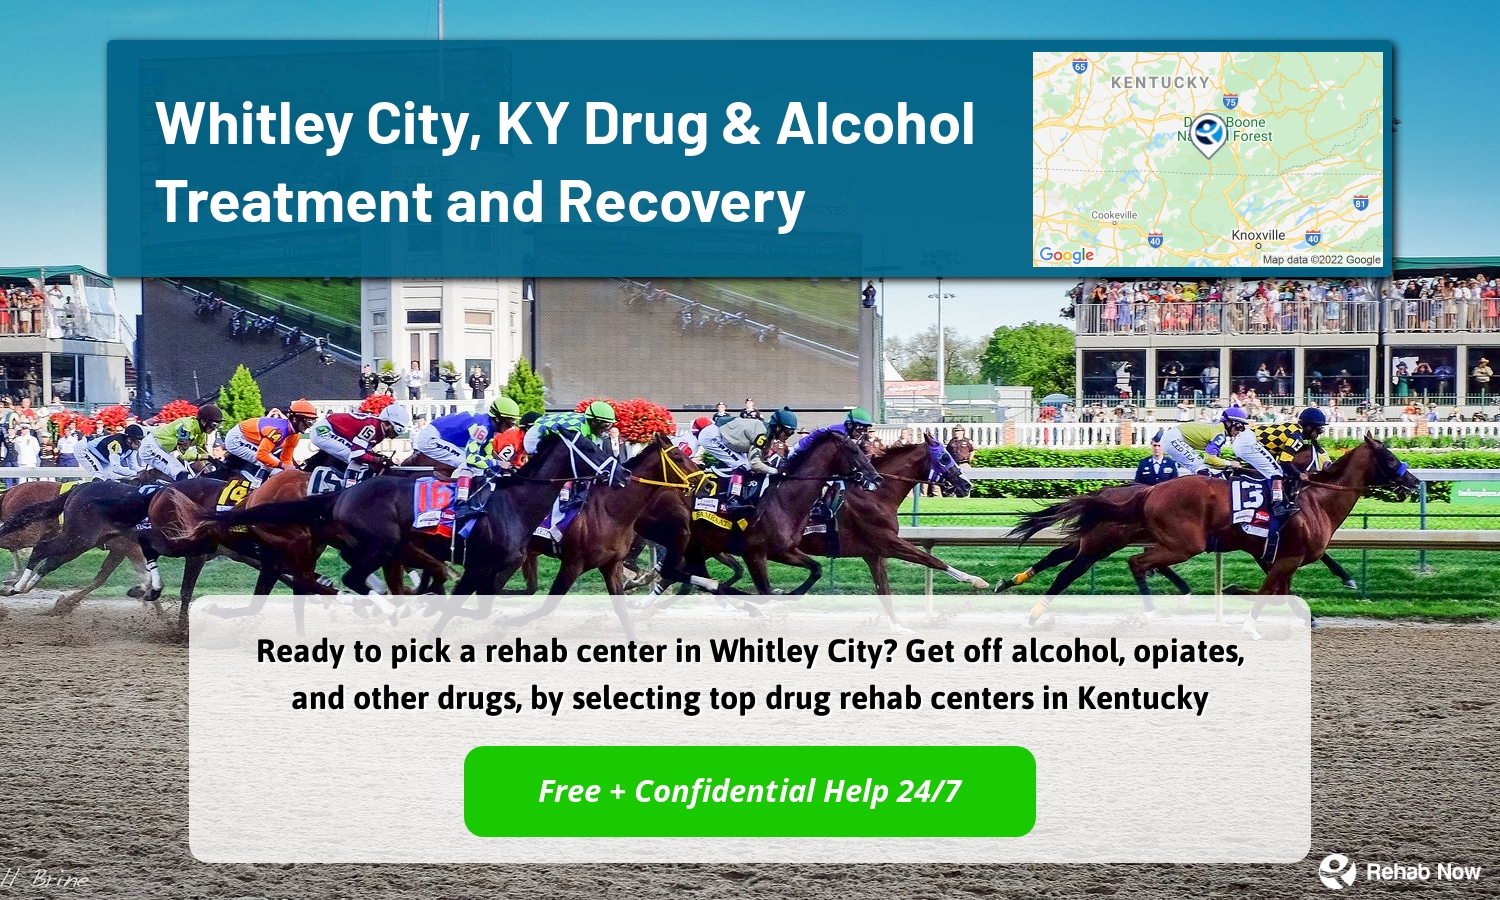 Ready to pick a rehab center in Whitley City? Get off alcohol, opiates, and other drugs, by selecting top drug rehab centers in Kentucky